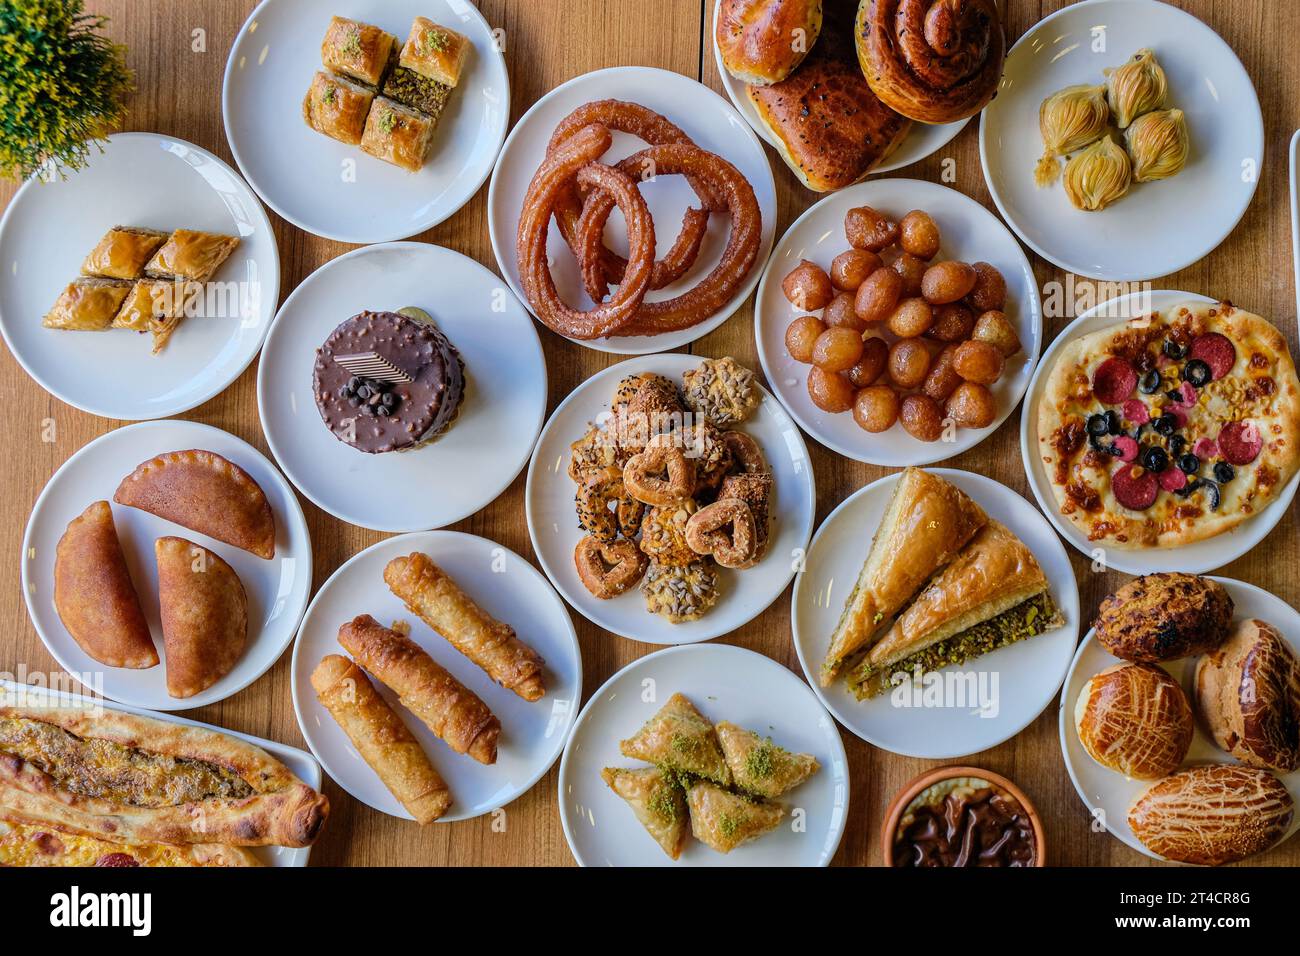 A picture from above of a table with dishes of traditional Turkish sweets and pastries Stock Photo